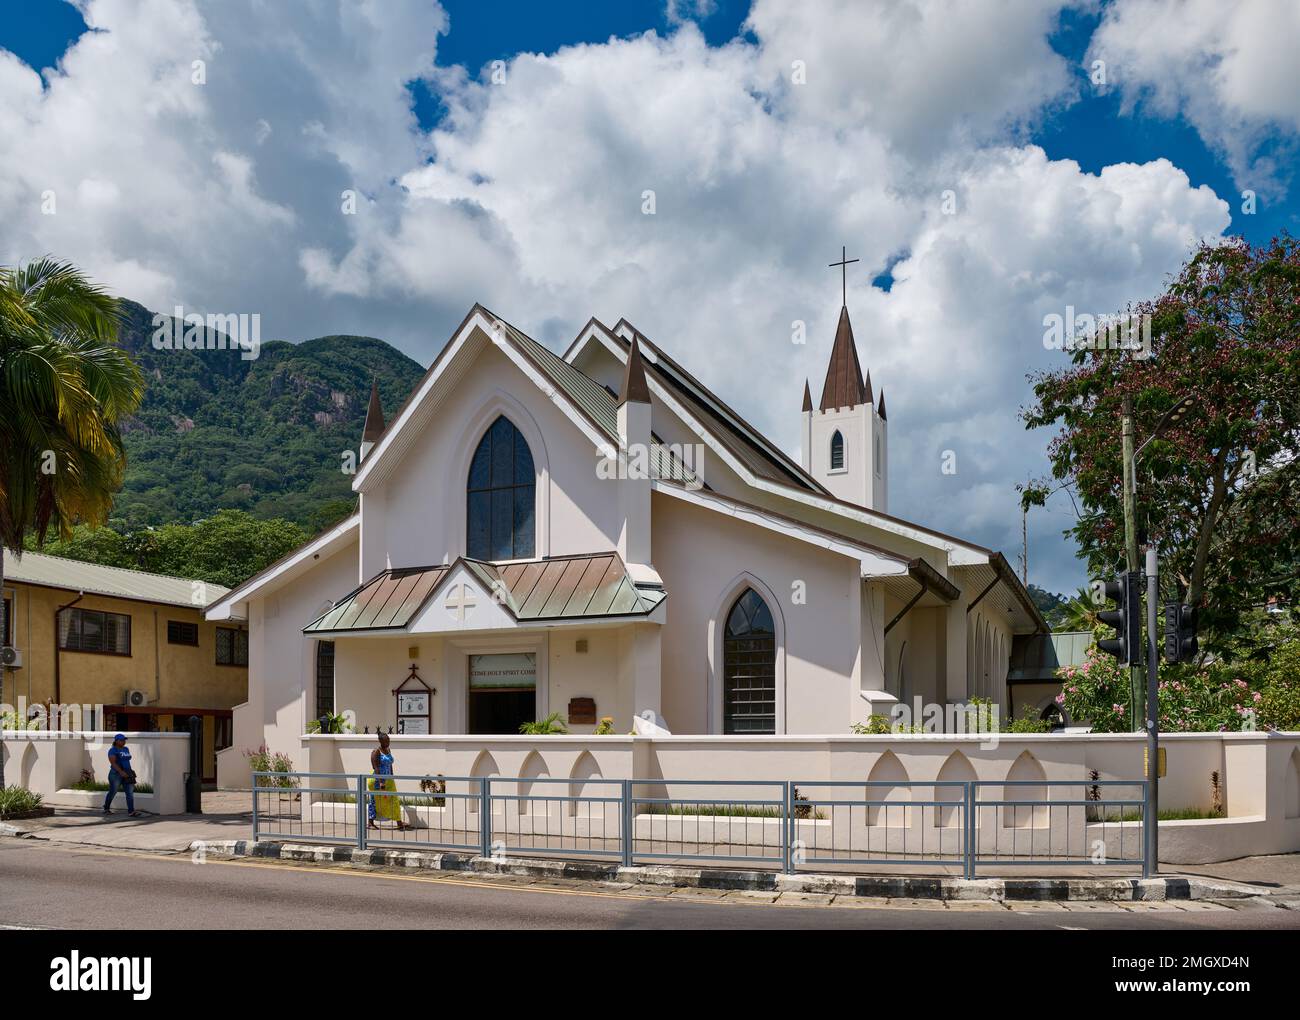 St. Paul's Anglican Cathedral, Victoria, Mahe, Seychelles Banque D'Images